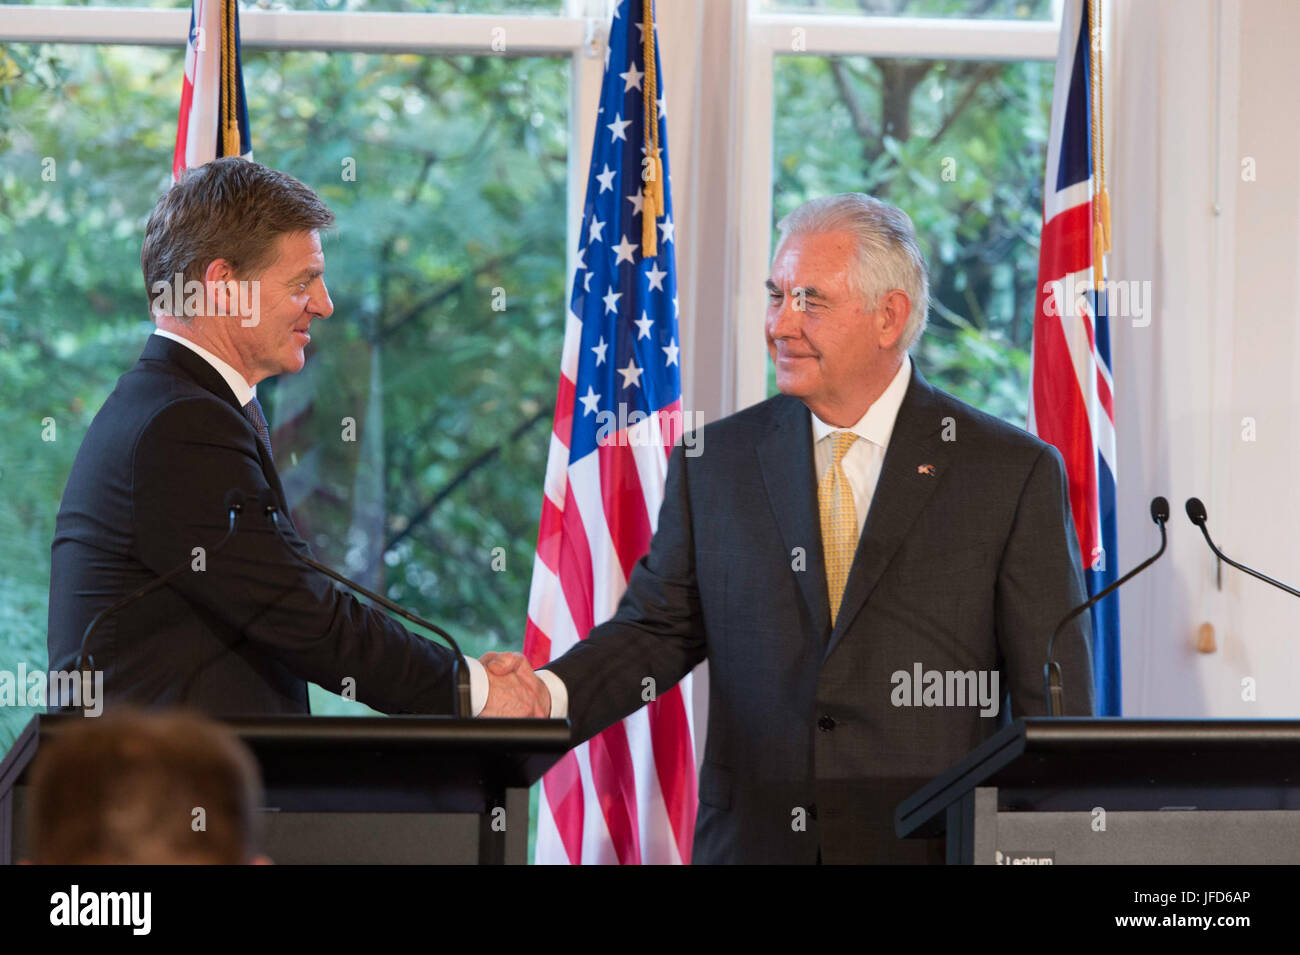 U.S. Secretary of State Rex Tillerson and New Zealander Prime Minister Bill English shake hands after their press conference in Wellington, New Zealand, on June 6, 2017. Stock Photo